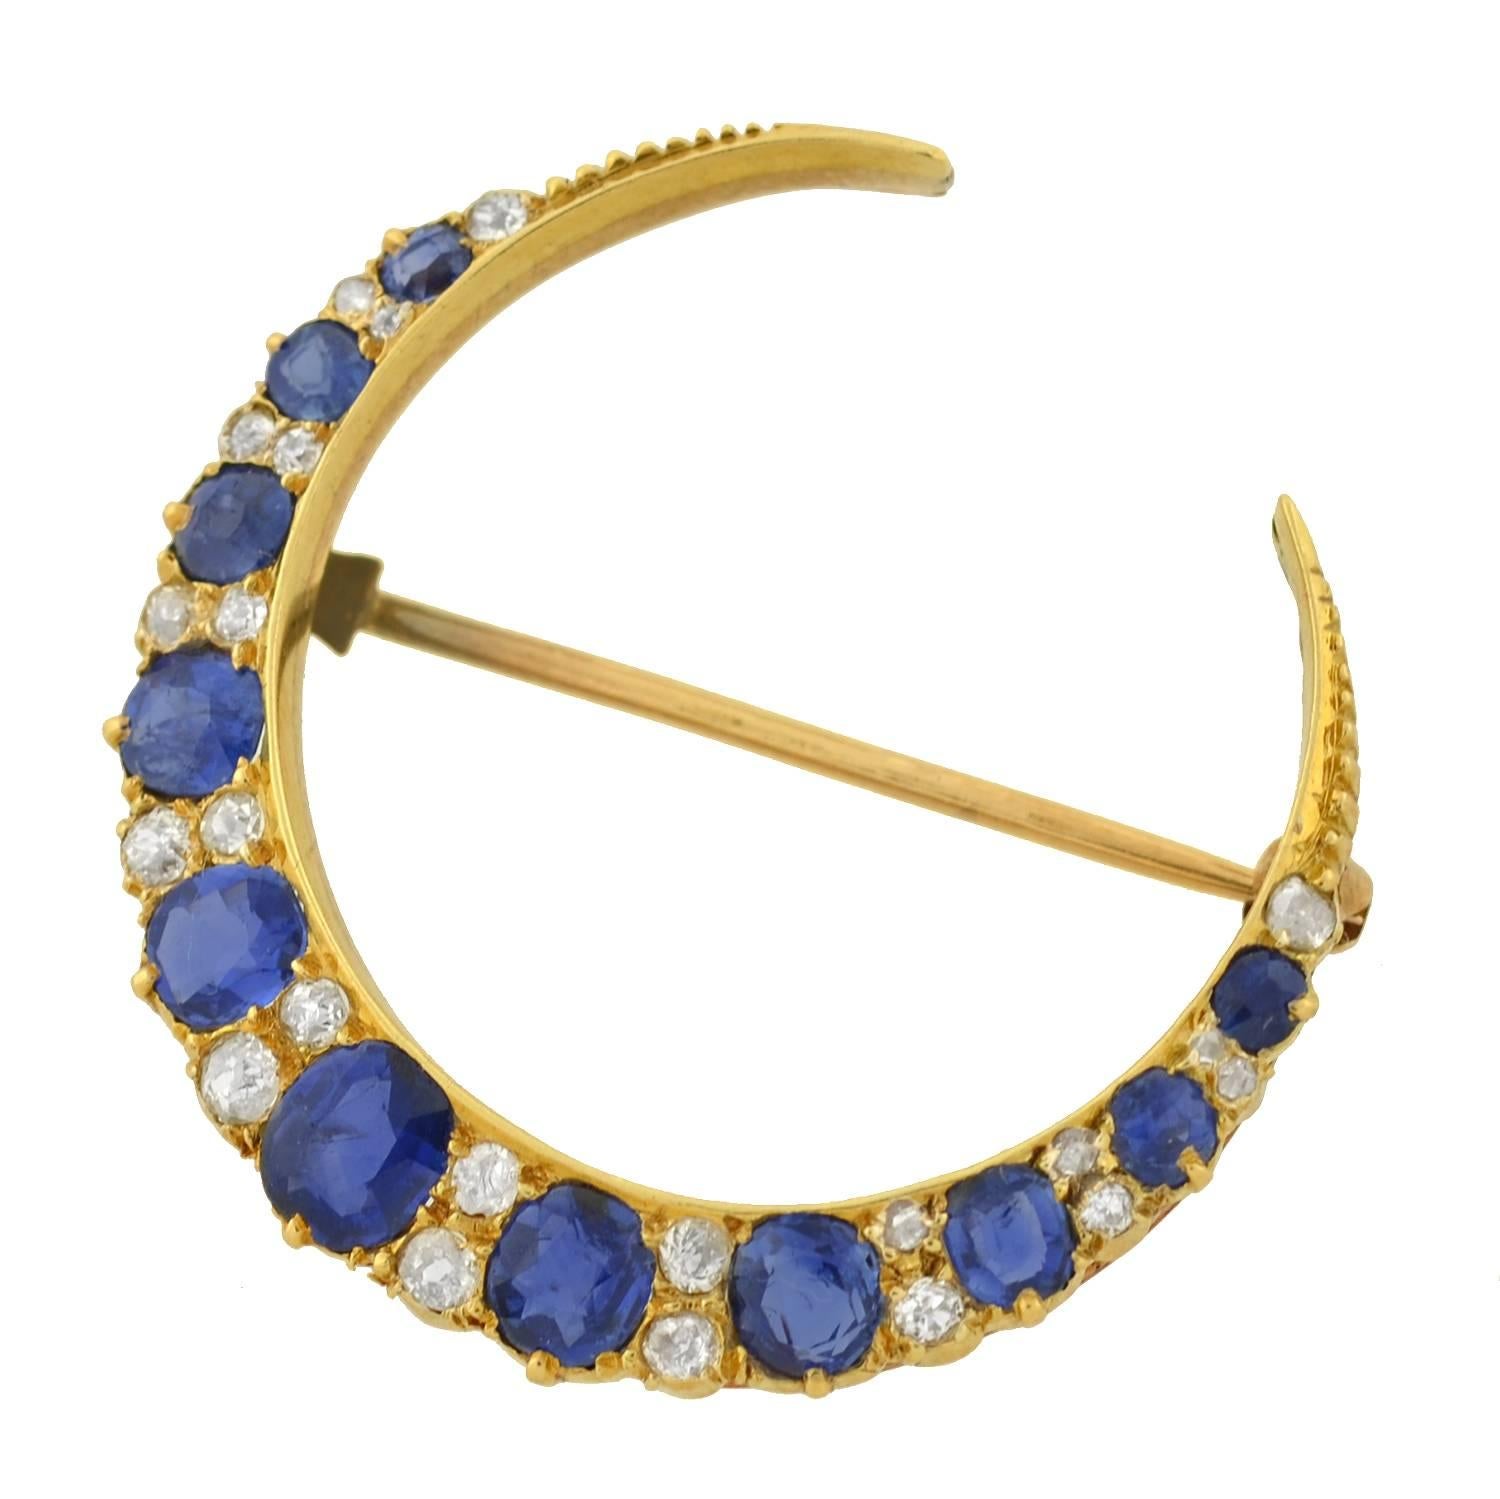 A breathtaking sapphire and diamond crescent pin from the Victorian (ca1880) era! Made of 14kt yellow gold, this exquisite crescent moon piece adorns 11 vibrant sapphires which alternate with rows of 22 old Mine Cut diamonds. The stones graduate in